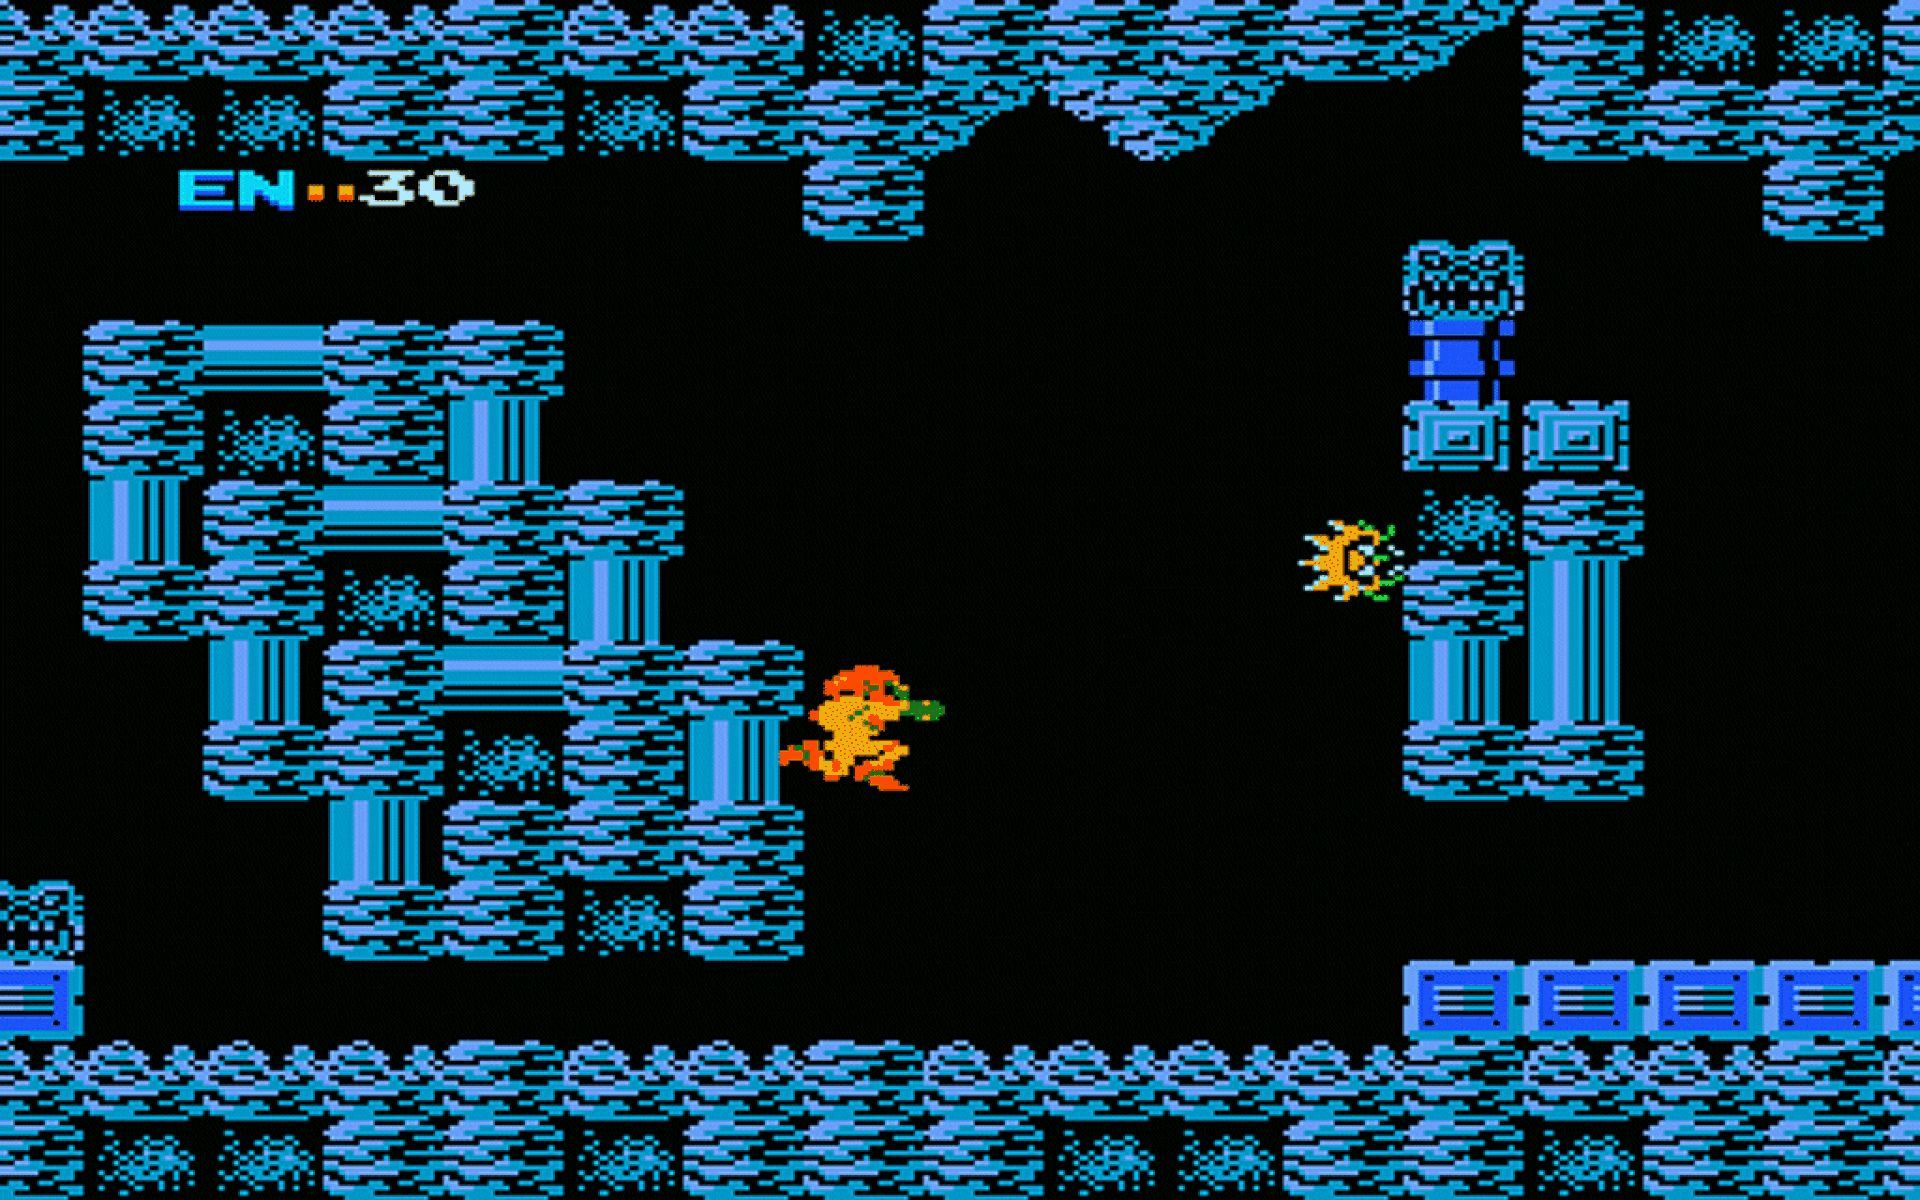 The first Metroid game takes place on the planet Zebes (Image via Nintendo)